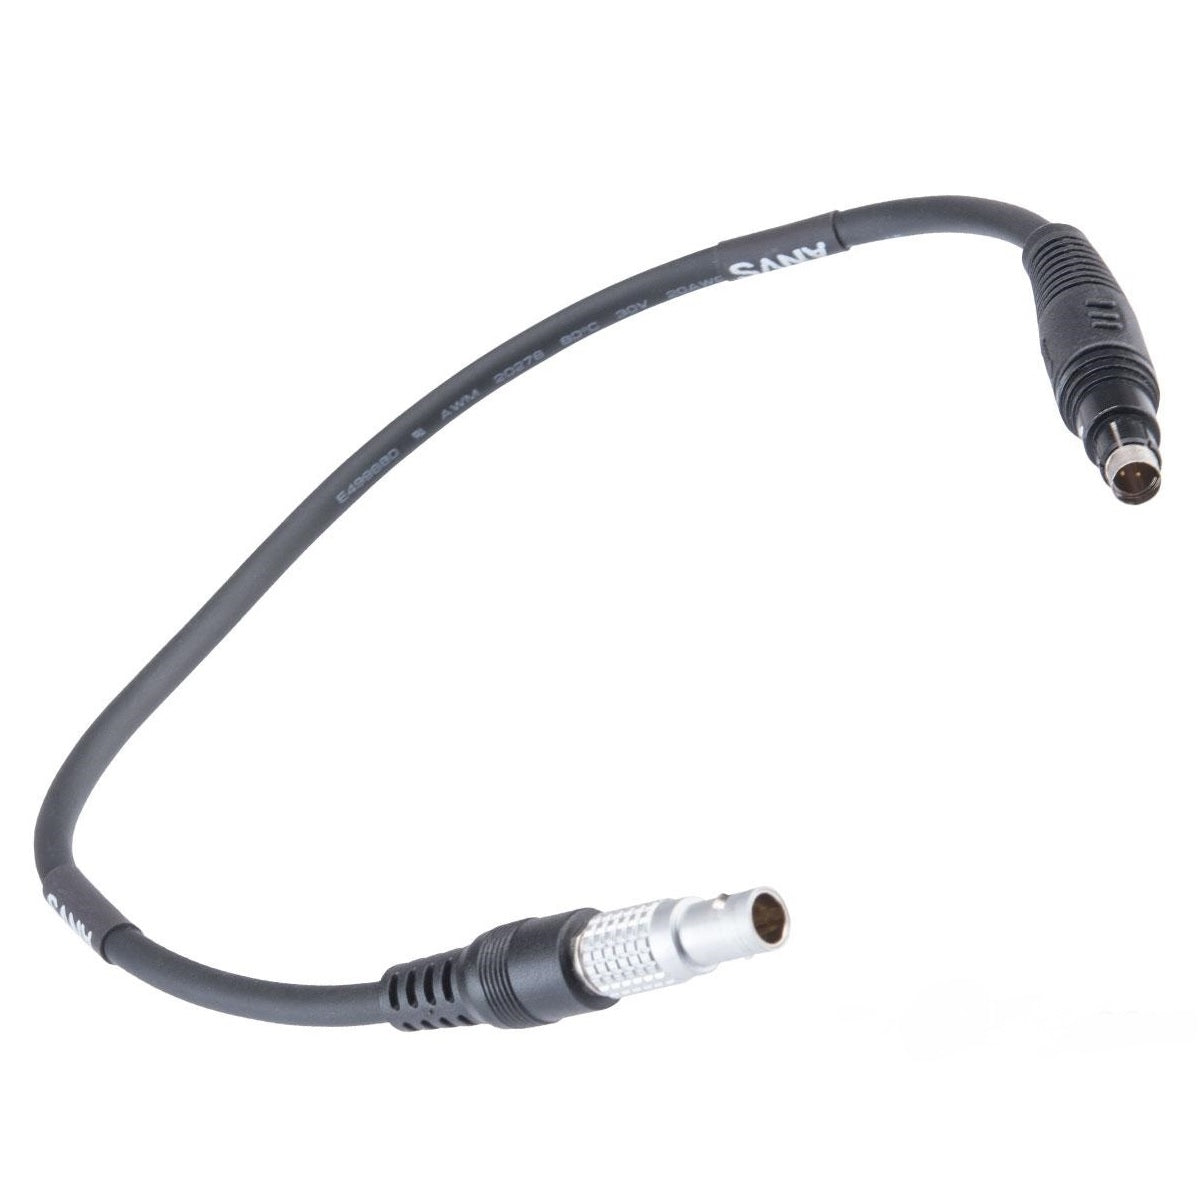 Fischer 4-pin to LEMO 4-pin Adapter Cable